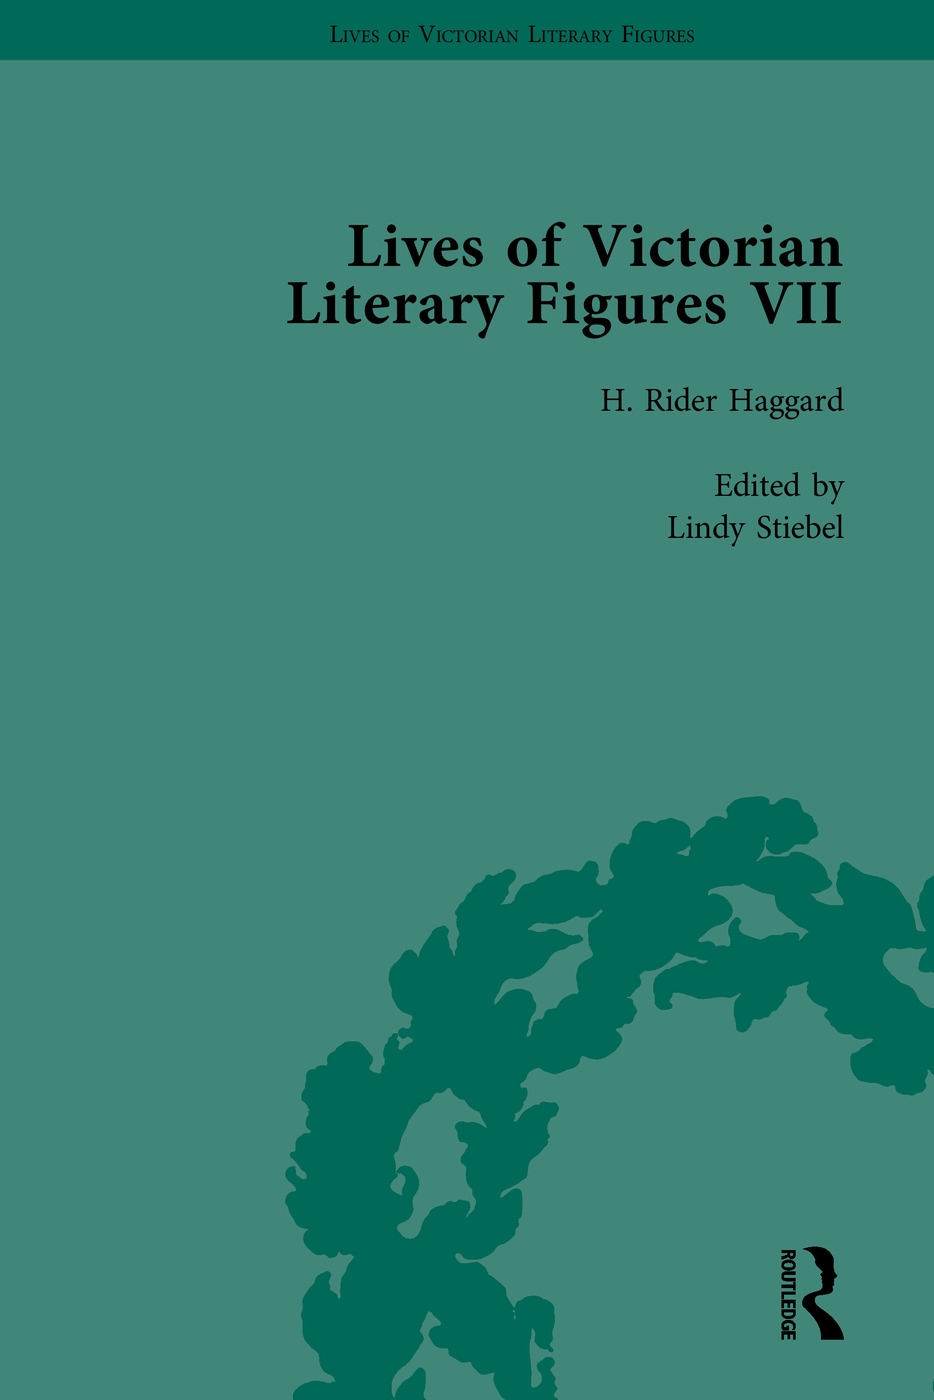 Lives of Victorian Literary Figures, Part VII: Joseph Conrad, Henry Rider Haggard and Rudyard Kipling by Their Contemporaries